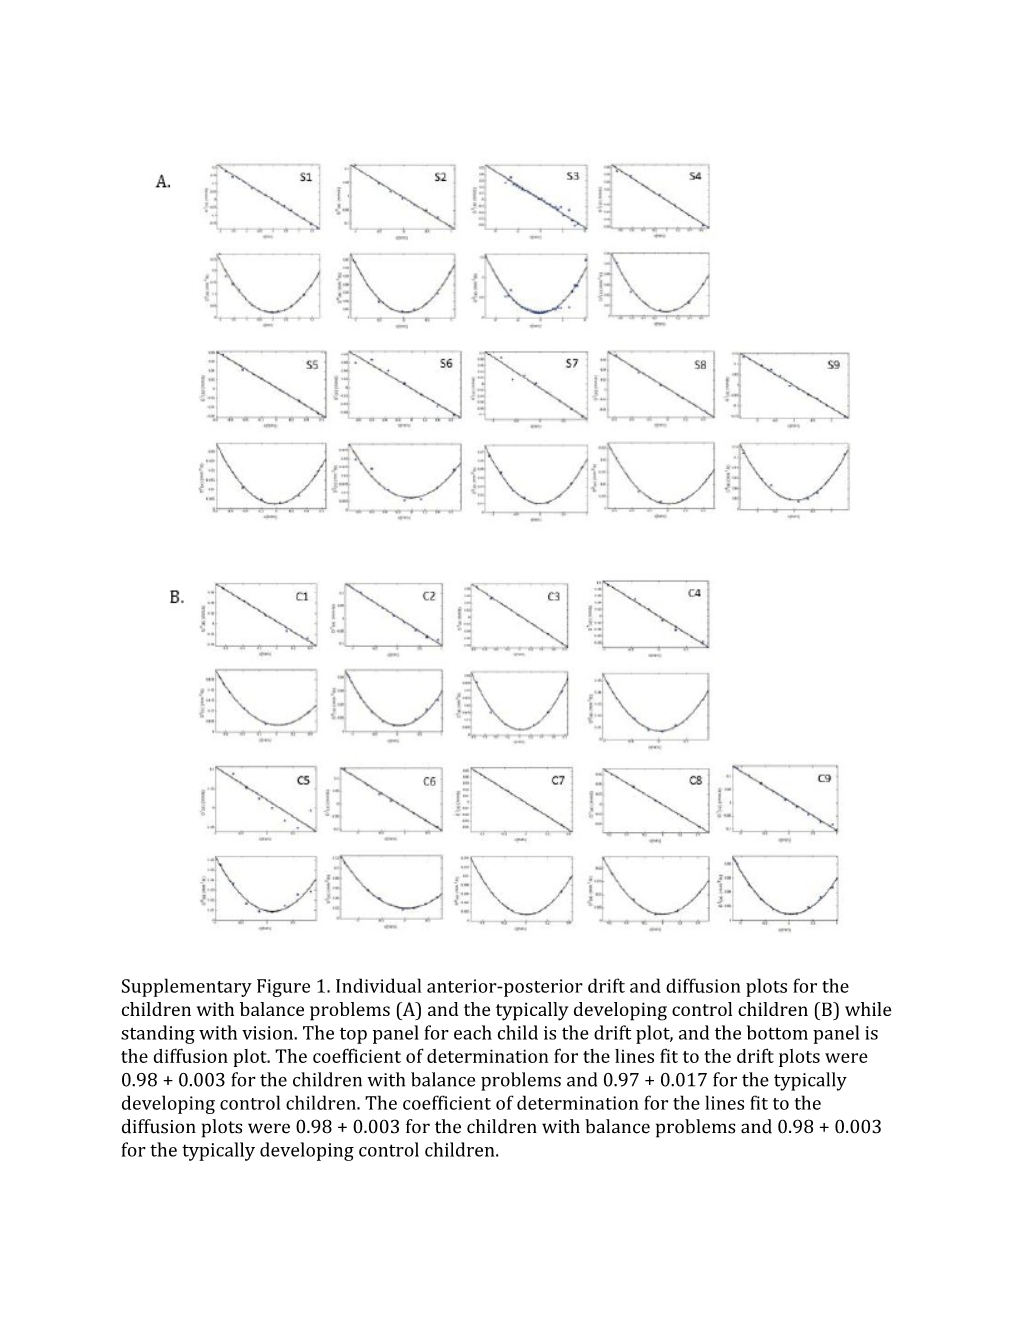 Supplementary Figure 1. Individual Anterior-Posterior Drift and Diffusion Plots for The